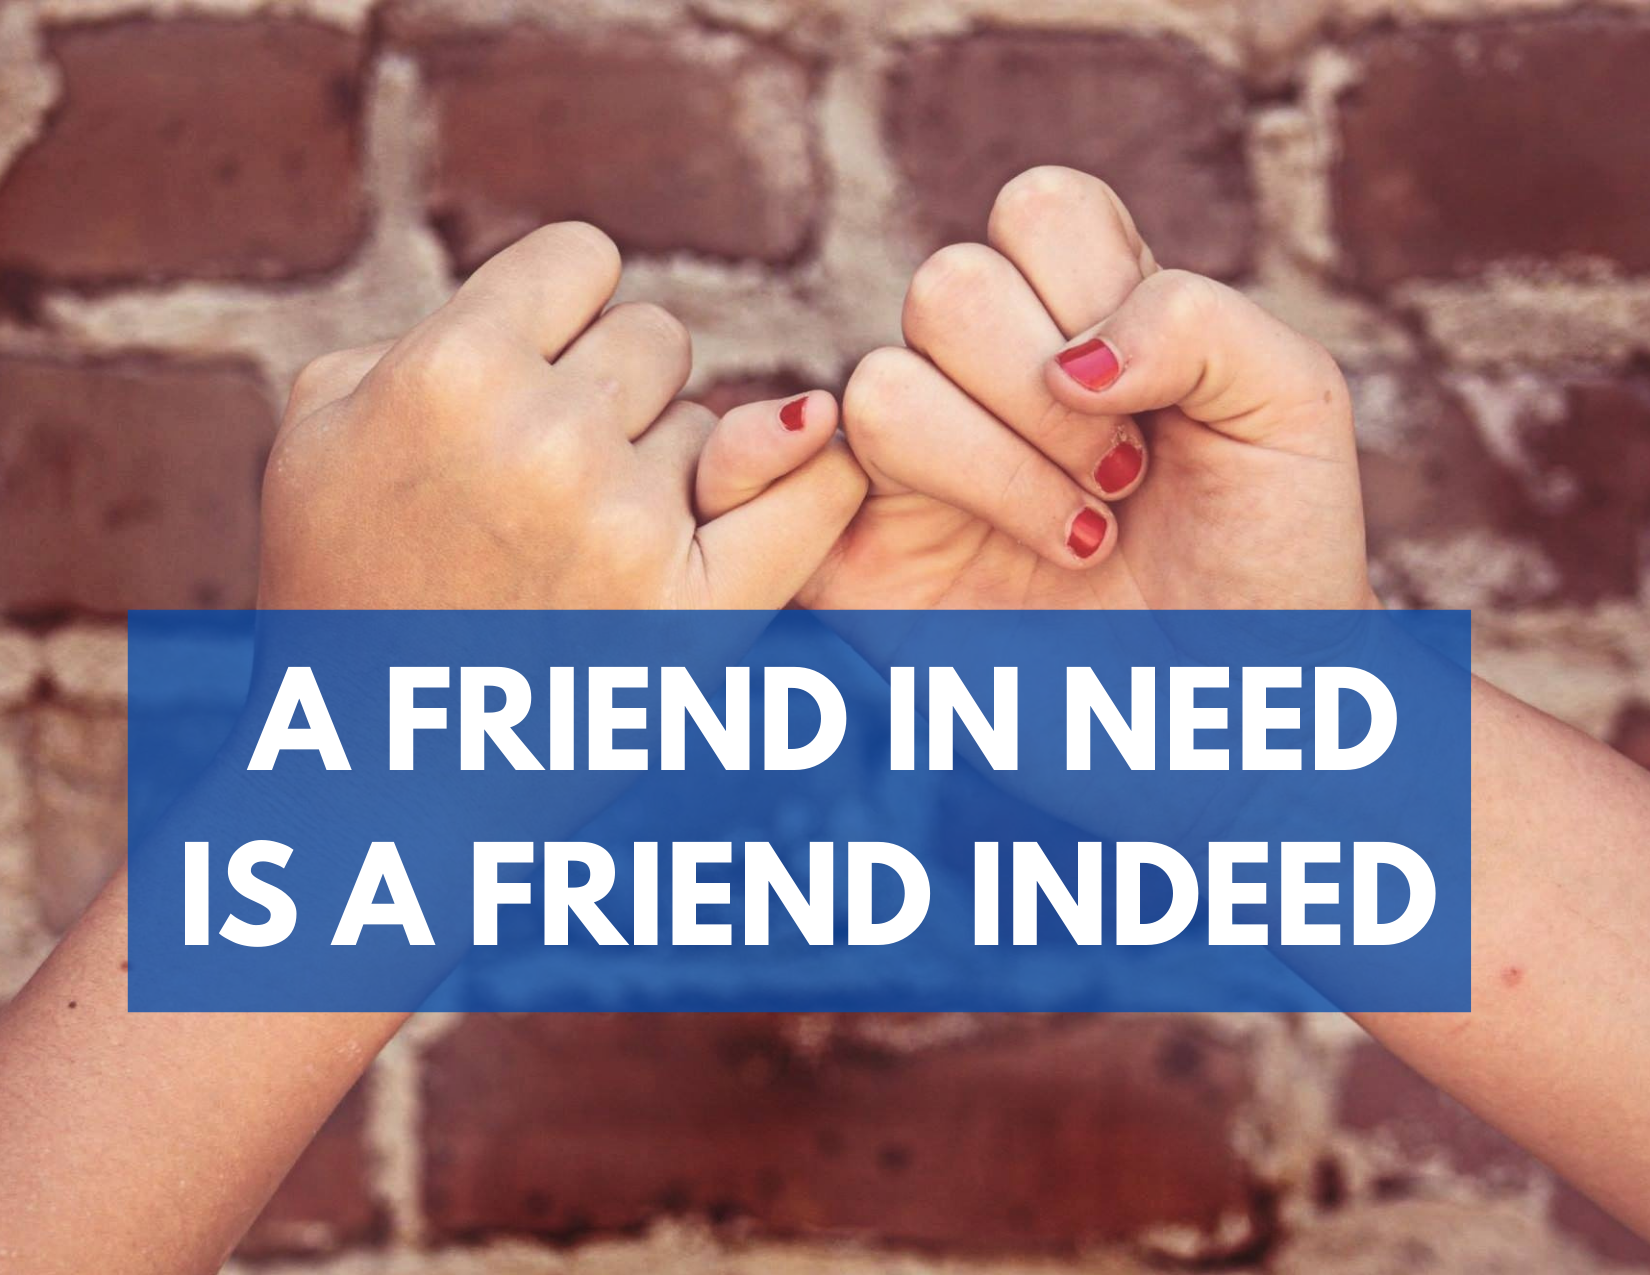 A picture of two hands locked in a "pinky swear" with the words "A friend in need is a friend indeed